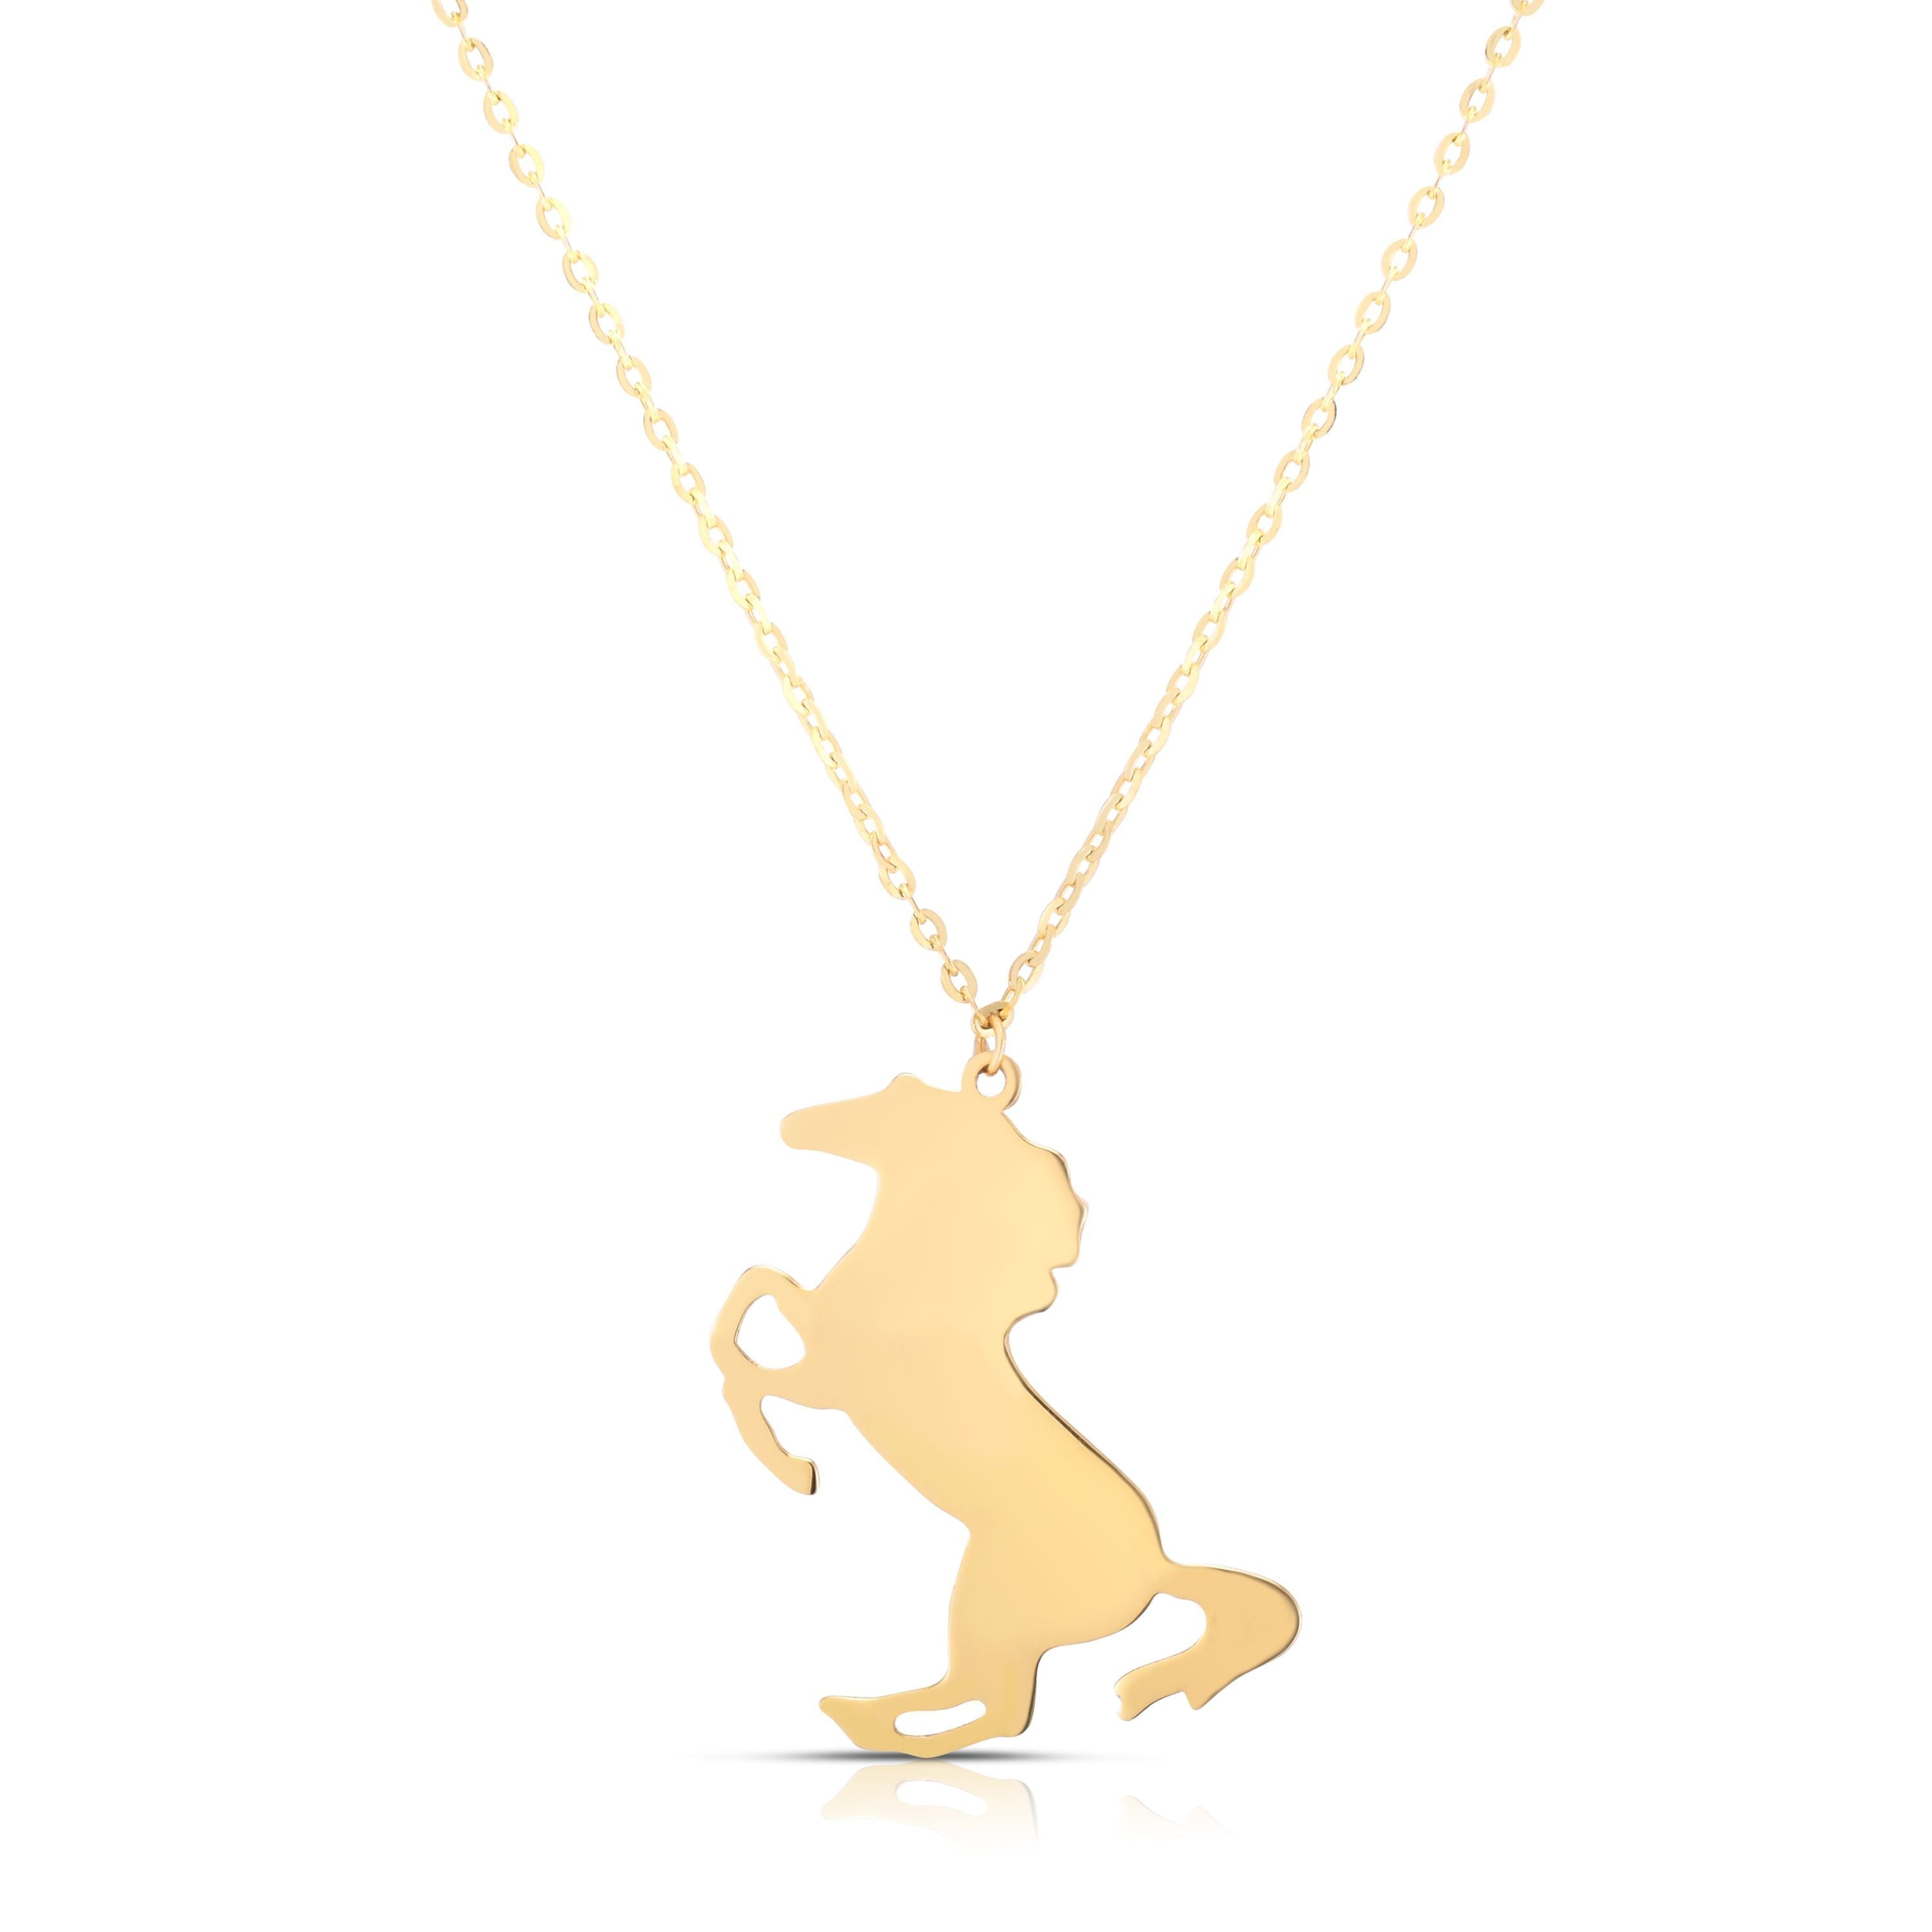 14k Minimalist Yellow Gold Horse Necklace, Earrings or Necklace and Earrings Combo